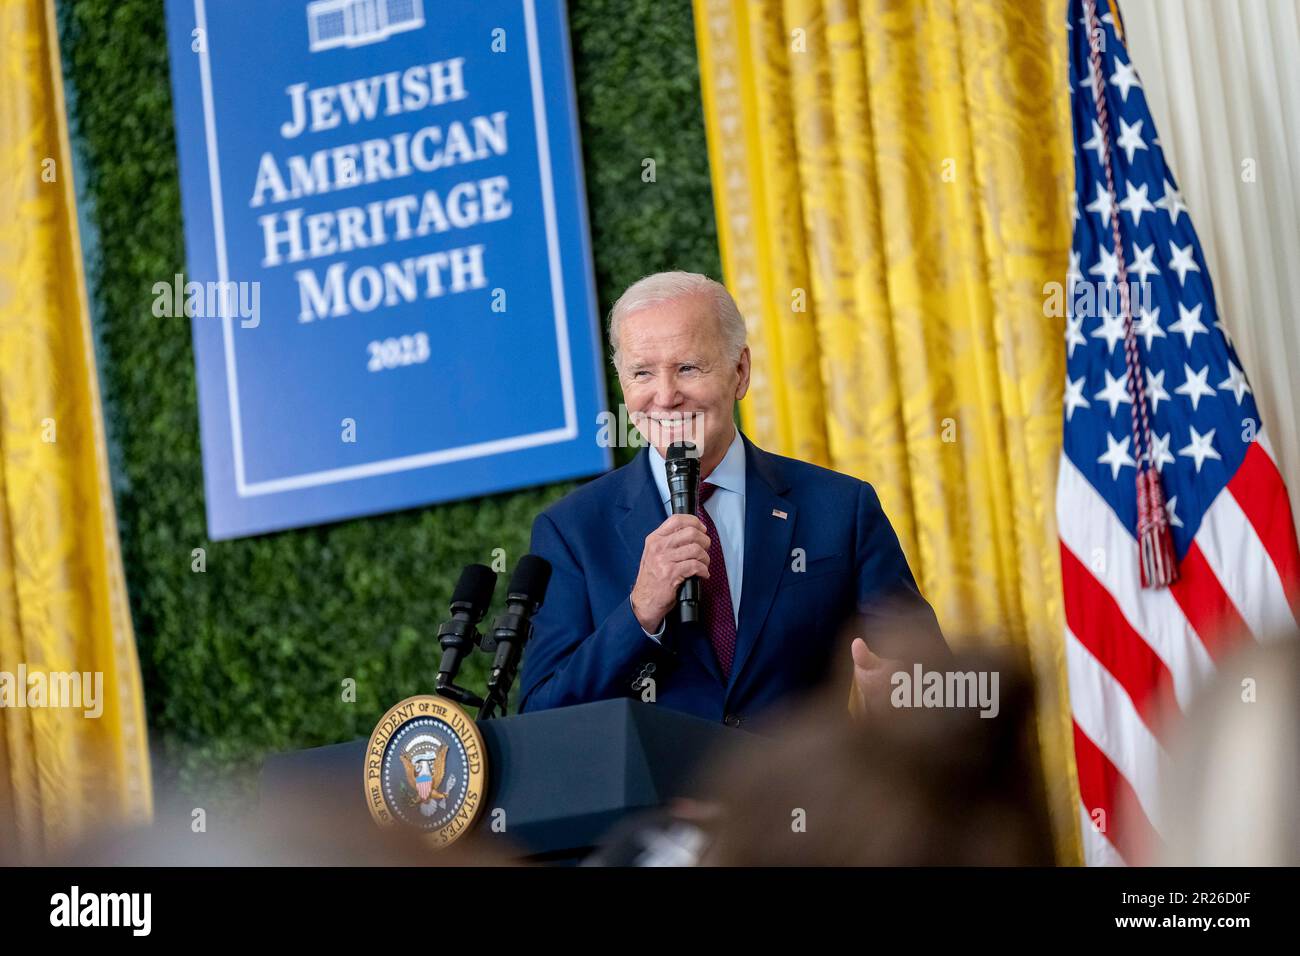 Washington, United States Of America. 16th May, 2023. Washington, United States of America. 16 May, 2023. U.S President Joe Biden during the first White House celebration of Jewish American Heritage Month in the East Room of the White House, May 16, 2023 in Washington, DC Biden denounced antisemitic bile and rising hatred from right-wing politicians. Credit: Adam Schultz/White House Photo/Alamy Live News Stock Photo